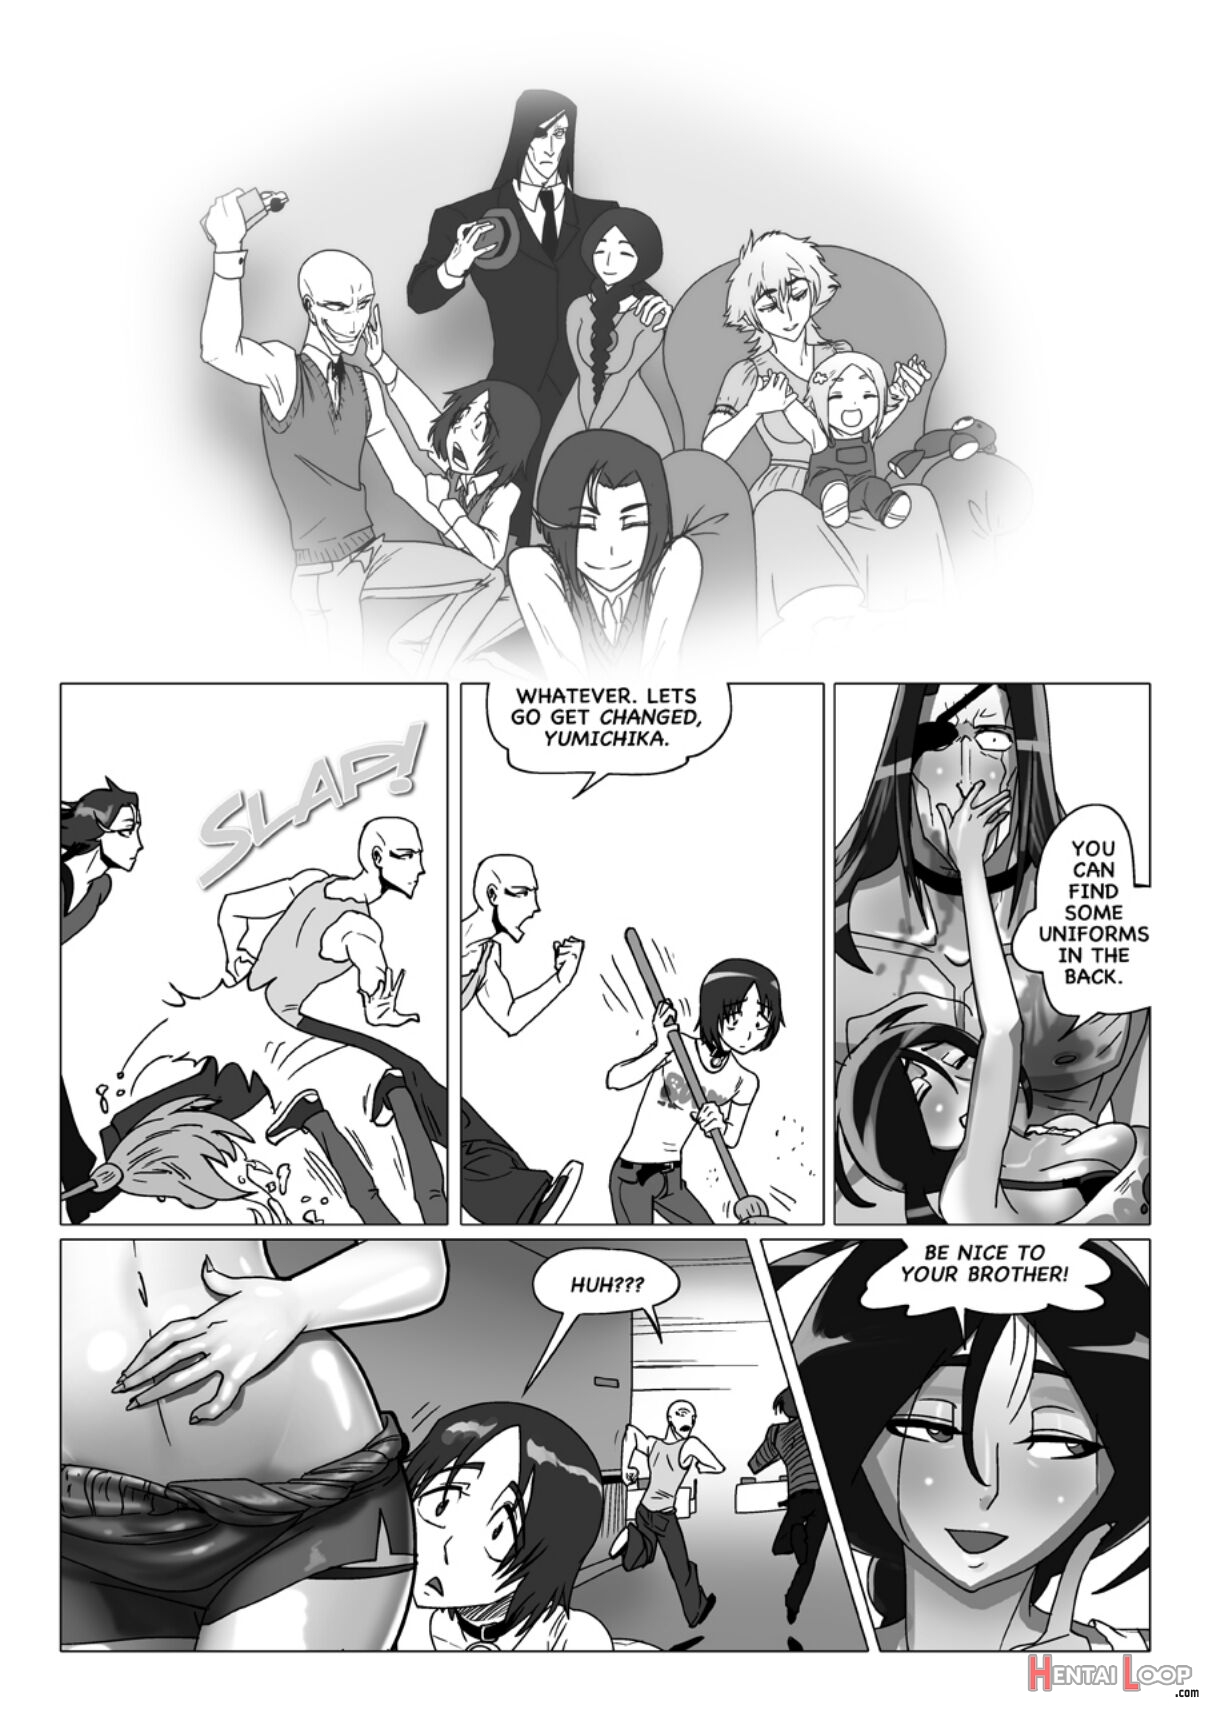 Happy To Serve You - Xxx Version page 64